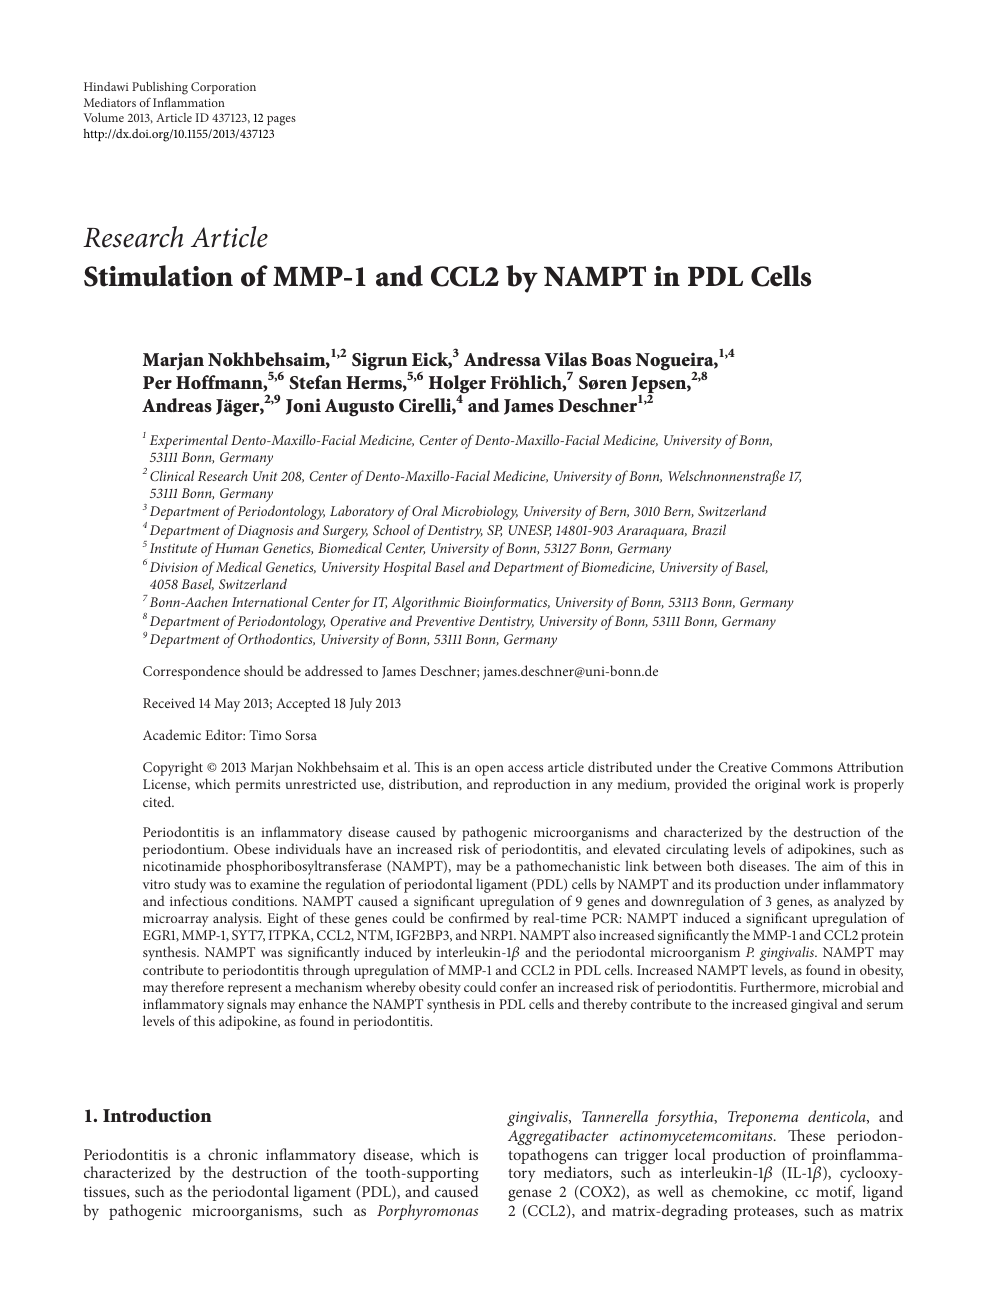 Stimulation Of Mmp 1 And Ccl2 By Nampt In Pdl Cells Topic Of Research Paper In Biological Sciences Download Scholarly Article Pdf And Read For Free On Cyberleninka Open Science Hub